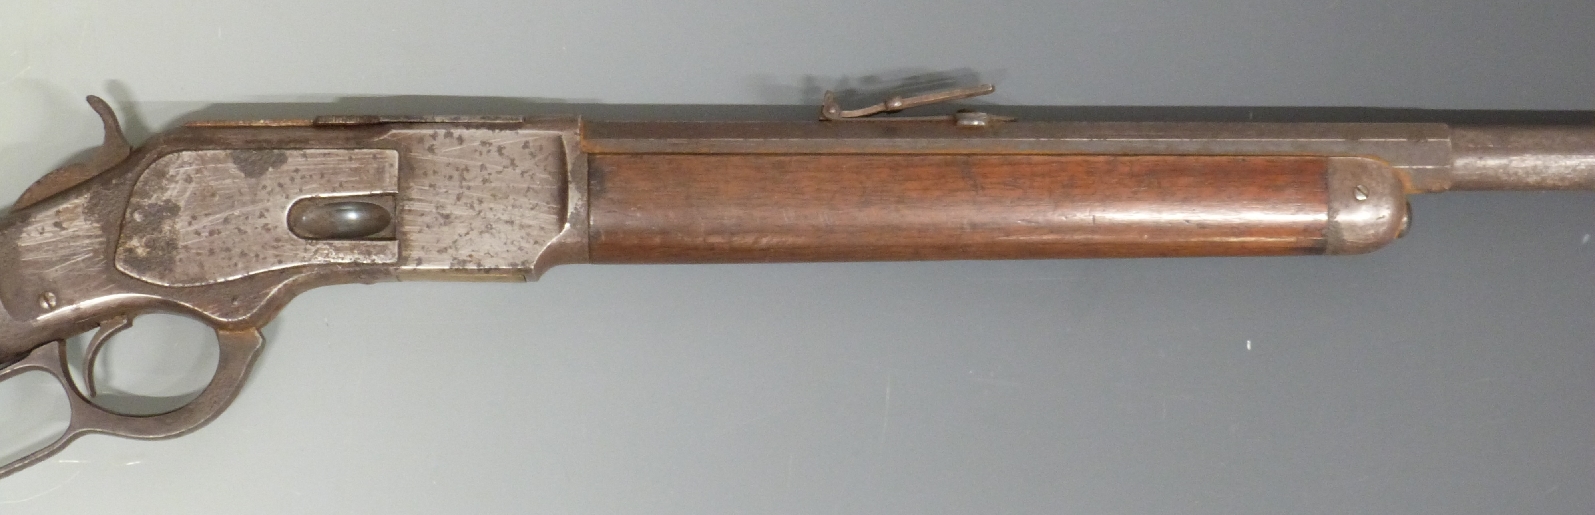 Winchester Model 1873 .44 saddle ring underlever rifle with adjustable pop-up sights, steel butt - Image 4 of 7